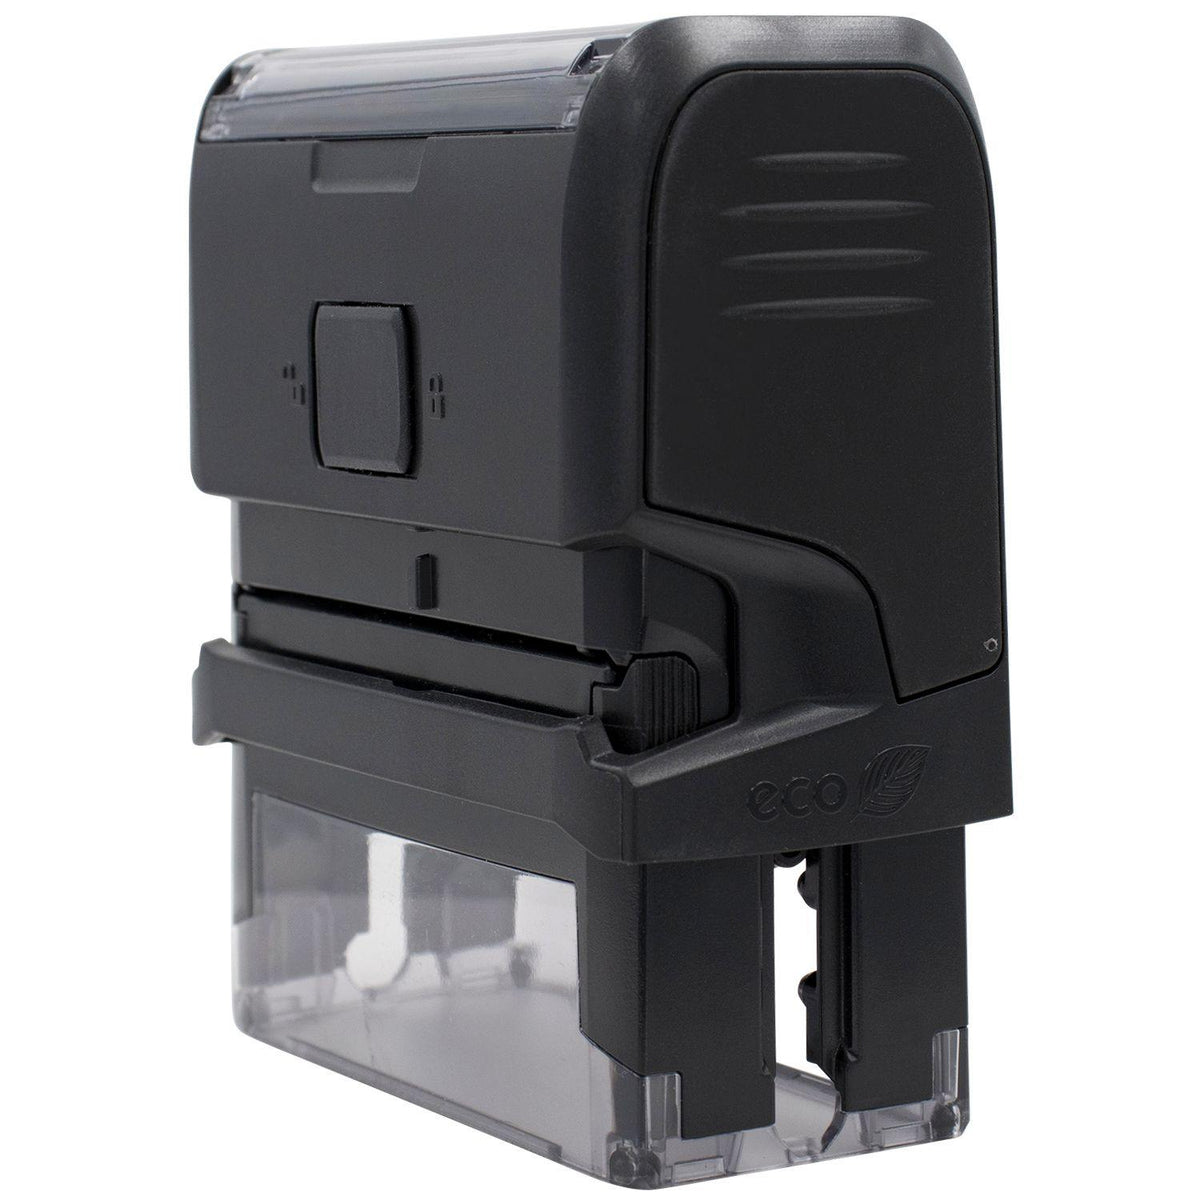 Self Inking Good Work Stamp - Engineer Seal Stamps - Brand_Trodat, Impression Size_Small, Stamp Type_Self-Inking Stamp, Type of Use_Teacher